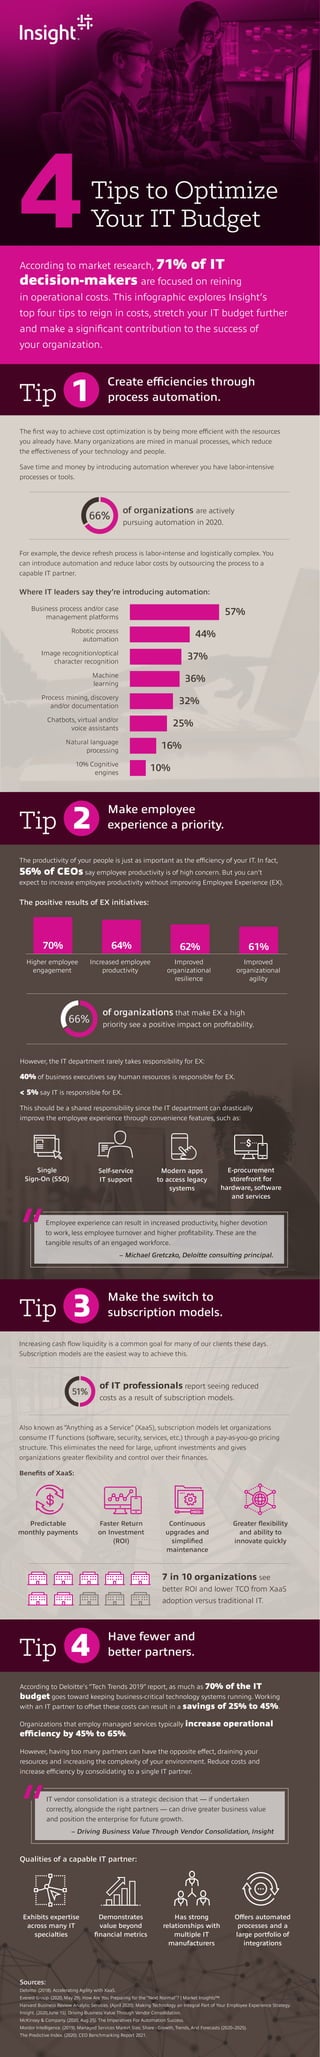 Where IT leaders say they’re introducing automation:
57%
44%
37%
36%
32%
25%
16%
10%
4Tips to Optimize
Your IT Budget
According to market research, 71% of IT
decision-makers are focused on reining
in operational costs. This infographic explores Insight’s
top four tips to reign in costs, stretch your IT budget further
and make a significant contribution to the success of
your organization.
The first way to achieve cost optimization is by being more efficient with the resources
you already have. Many organizations are mired in manual processes, which reduce
the effectiveness of your technology and people.
Save time and money by introducing automation wherever you have labor-intensive
processes or tools.
Increasing cash flow liquidity is a common goal for many of our clients these days.
Subscription models are the easiest way to achieve this.
Also known as “Anything as a Service” (XaaS), subscription models let organizations
consume IT functions (software, security, services, etc.) through a pay-as-you-go pricing
structure. This eliminates the need for large, upfront investments and gives
organizations greater flexibility and control over their finances.
Benefits of XaaS:
For example, the device refresh process is labor-intense and logistically complex. You
can introduce automation and reduce labor costs by outsourcing the process to a
capable IT partner.
Business process and/or case
management platforms
Robotic process
automation
Image recognition/optical
character recognition
Machine
learning
Process mining, discovery
and/or documentation
Chatbots, virtual and/or
voice assistants
Natural language
processing
10% Cognitive
engines
of organizations are actively
pursuing automation in 2020.
of IT professionals report seeing reduced
costs as a result of subscription models.
The positive results of EX initiatives:
of organizations that make EX a high
priority see a positive impact on profitability.
The productivity of your people is just as important as the efficiency of your IT. In fact,
56% of CEOs say employee productivity is of high concern. But you can’t
expect to increase employee productivity without improving Employee Experience (EX).
According to Deloitte’s “Tech Trends 2019” report, as much as 70% of the IT
budget goes toward keeping business-critical technology systems running. Working
with an IT partner to offset these costs can result in a savings of 25% to 45%.
Organizations that employ managed services typically increase operational
efficiency by 45% to 65%.
However, having too many partners can have the opposite effect, draining your
resources and increasing the complexity of your environment. Reduce costs and
increase efficiency by consolidating to a single IT partner.
Sources:
Deloitte. (2018). Accelerating Agility with XaaS.
Everest Group. (2020, May 29). How Are You Preparing for the “Next Normal”? | Market Insights™.
Harvard Business Review Analytic Services. (April 2020). Making Technology an Integral Part of Your Employee Experience Strategy.
Insight. (2020,June 15). Driving Business Value Through Vendor Consolidation.
McKinsey & Company. (2020, Aug 25). The Imperatives For Automation Success.
Mordor Intelligence. (2019). Managed Services Market Size, Share - Growth, Trends, And Forecasts (2020–2025).
The Predictive Index. (2020). CEO Benchmarking Report 2021.
Higher employee
engagement
70% 64% 62% 61%
Increased employee
productivity
Improved
organizational
resilience
Improved
organizational
agility
However, the IT department rarely takes responsibility for EX:
40% of business executives say human resources is responsible for EX.
< 5% say IT is responsible for EX.
This should be a shared responsibility since the IT department can drastically
improve the employee experience through convenience features, such as:
Single
Sign-On (SSO)
Predictable
monthly payments
Self-service
IT support
Faster Return
on Investment
(ROI)
Modern apps
to access legacy
systems
Continuous
upgrades and
simplified
maintenance
E-procurement
storefront for
hardware, software
and services
Greater flexibility
and ability to
innovate quickly
Employee experience can result in increased productivity, higher devotion
to work, less employee turnover and higher profitability. These are the
tangible results of an engaged workforce.
– Michael Gretczko, Deloitte consulting principal.
“
7 in 10 organizations see
better ROI and lower TCO from XaaS
adoption versus traditional IT.
Create efficiencies through
process automation.Tip 1
Make employee
experience a priority.
Have fewer and
better partners.
Tip 2
Tip 4
Make the switch to
subscription models.Tip 3
IT vendor consolidation is a strategic decision that — if undertaken
correctly, alongside the right partners — can drive greater business value
and position the enterprise for future growth.
– Driving Business Value Through Vendor Consolidation, Insight
“
Exhibits expertise
across many IT
specialties
Demonstrates
value beyond
financial metrics
Has strong
relationships with
multiple IT
manufacturers
Offers automated
processes and a
large portfolio of
integrations
Qualities of a capable IT partner:
 